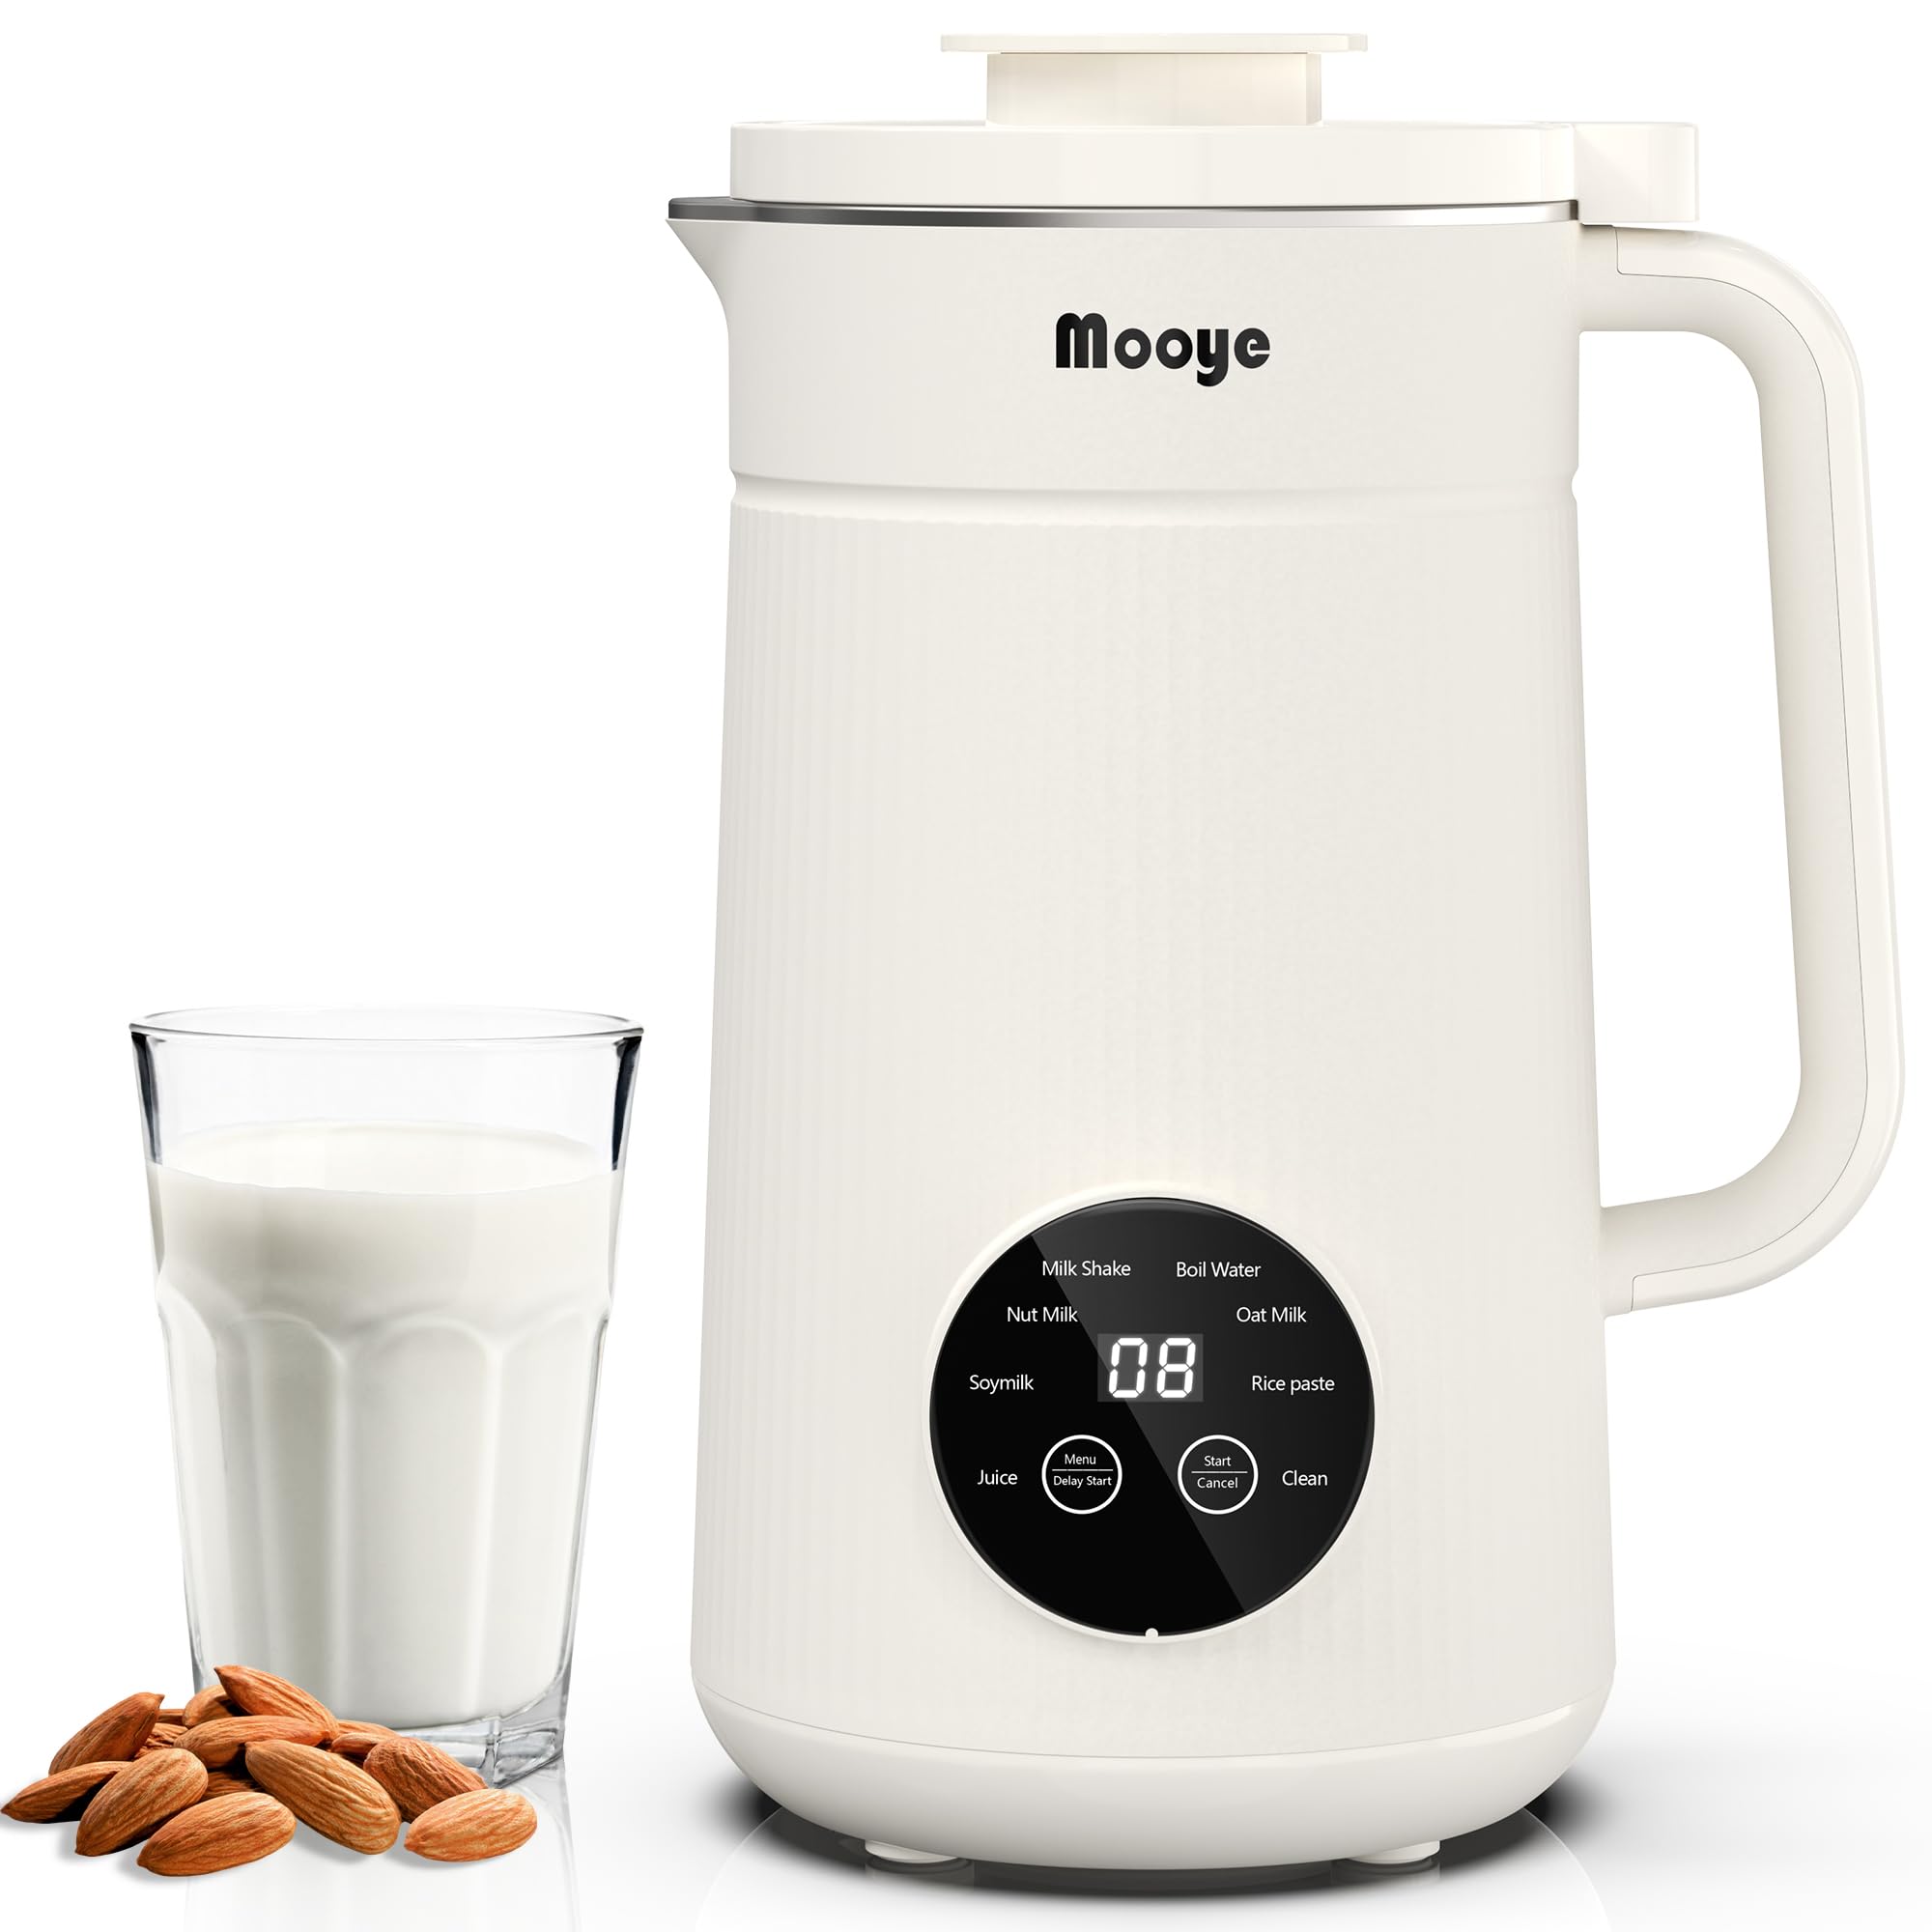 A blender with almonds and a glass of milk.